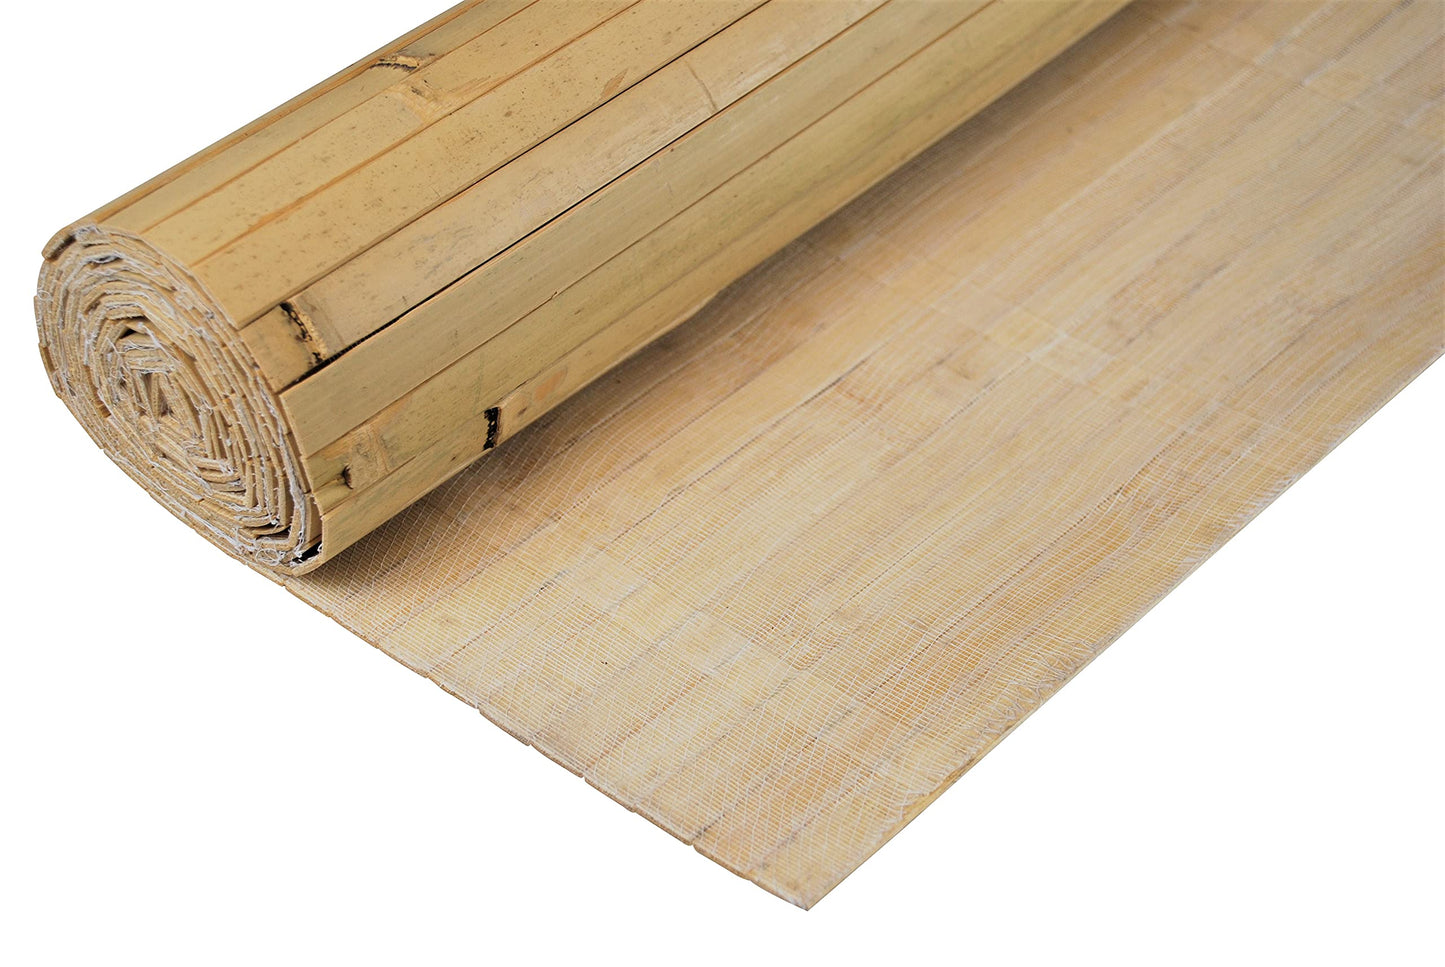 amaZulu Inc. Natural Bamboo Paneling - Flexible Wall Cladding Panels for Living Room Decor, Ceiling Tiles, and Outdoor Kitchens - Renewable Resource, Home Decor, 32 sq ft Coverage, Natural